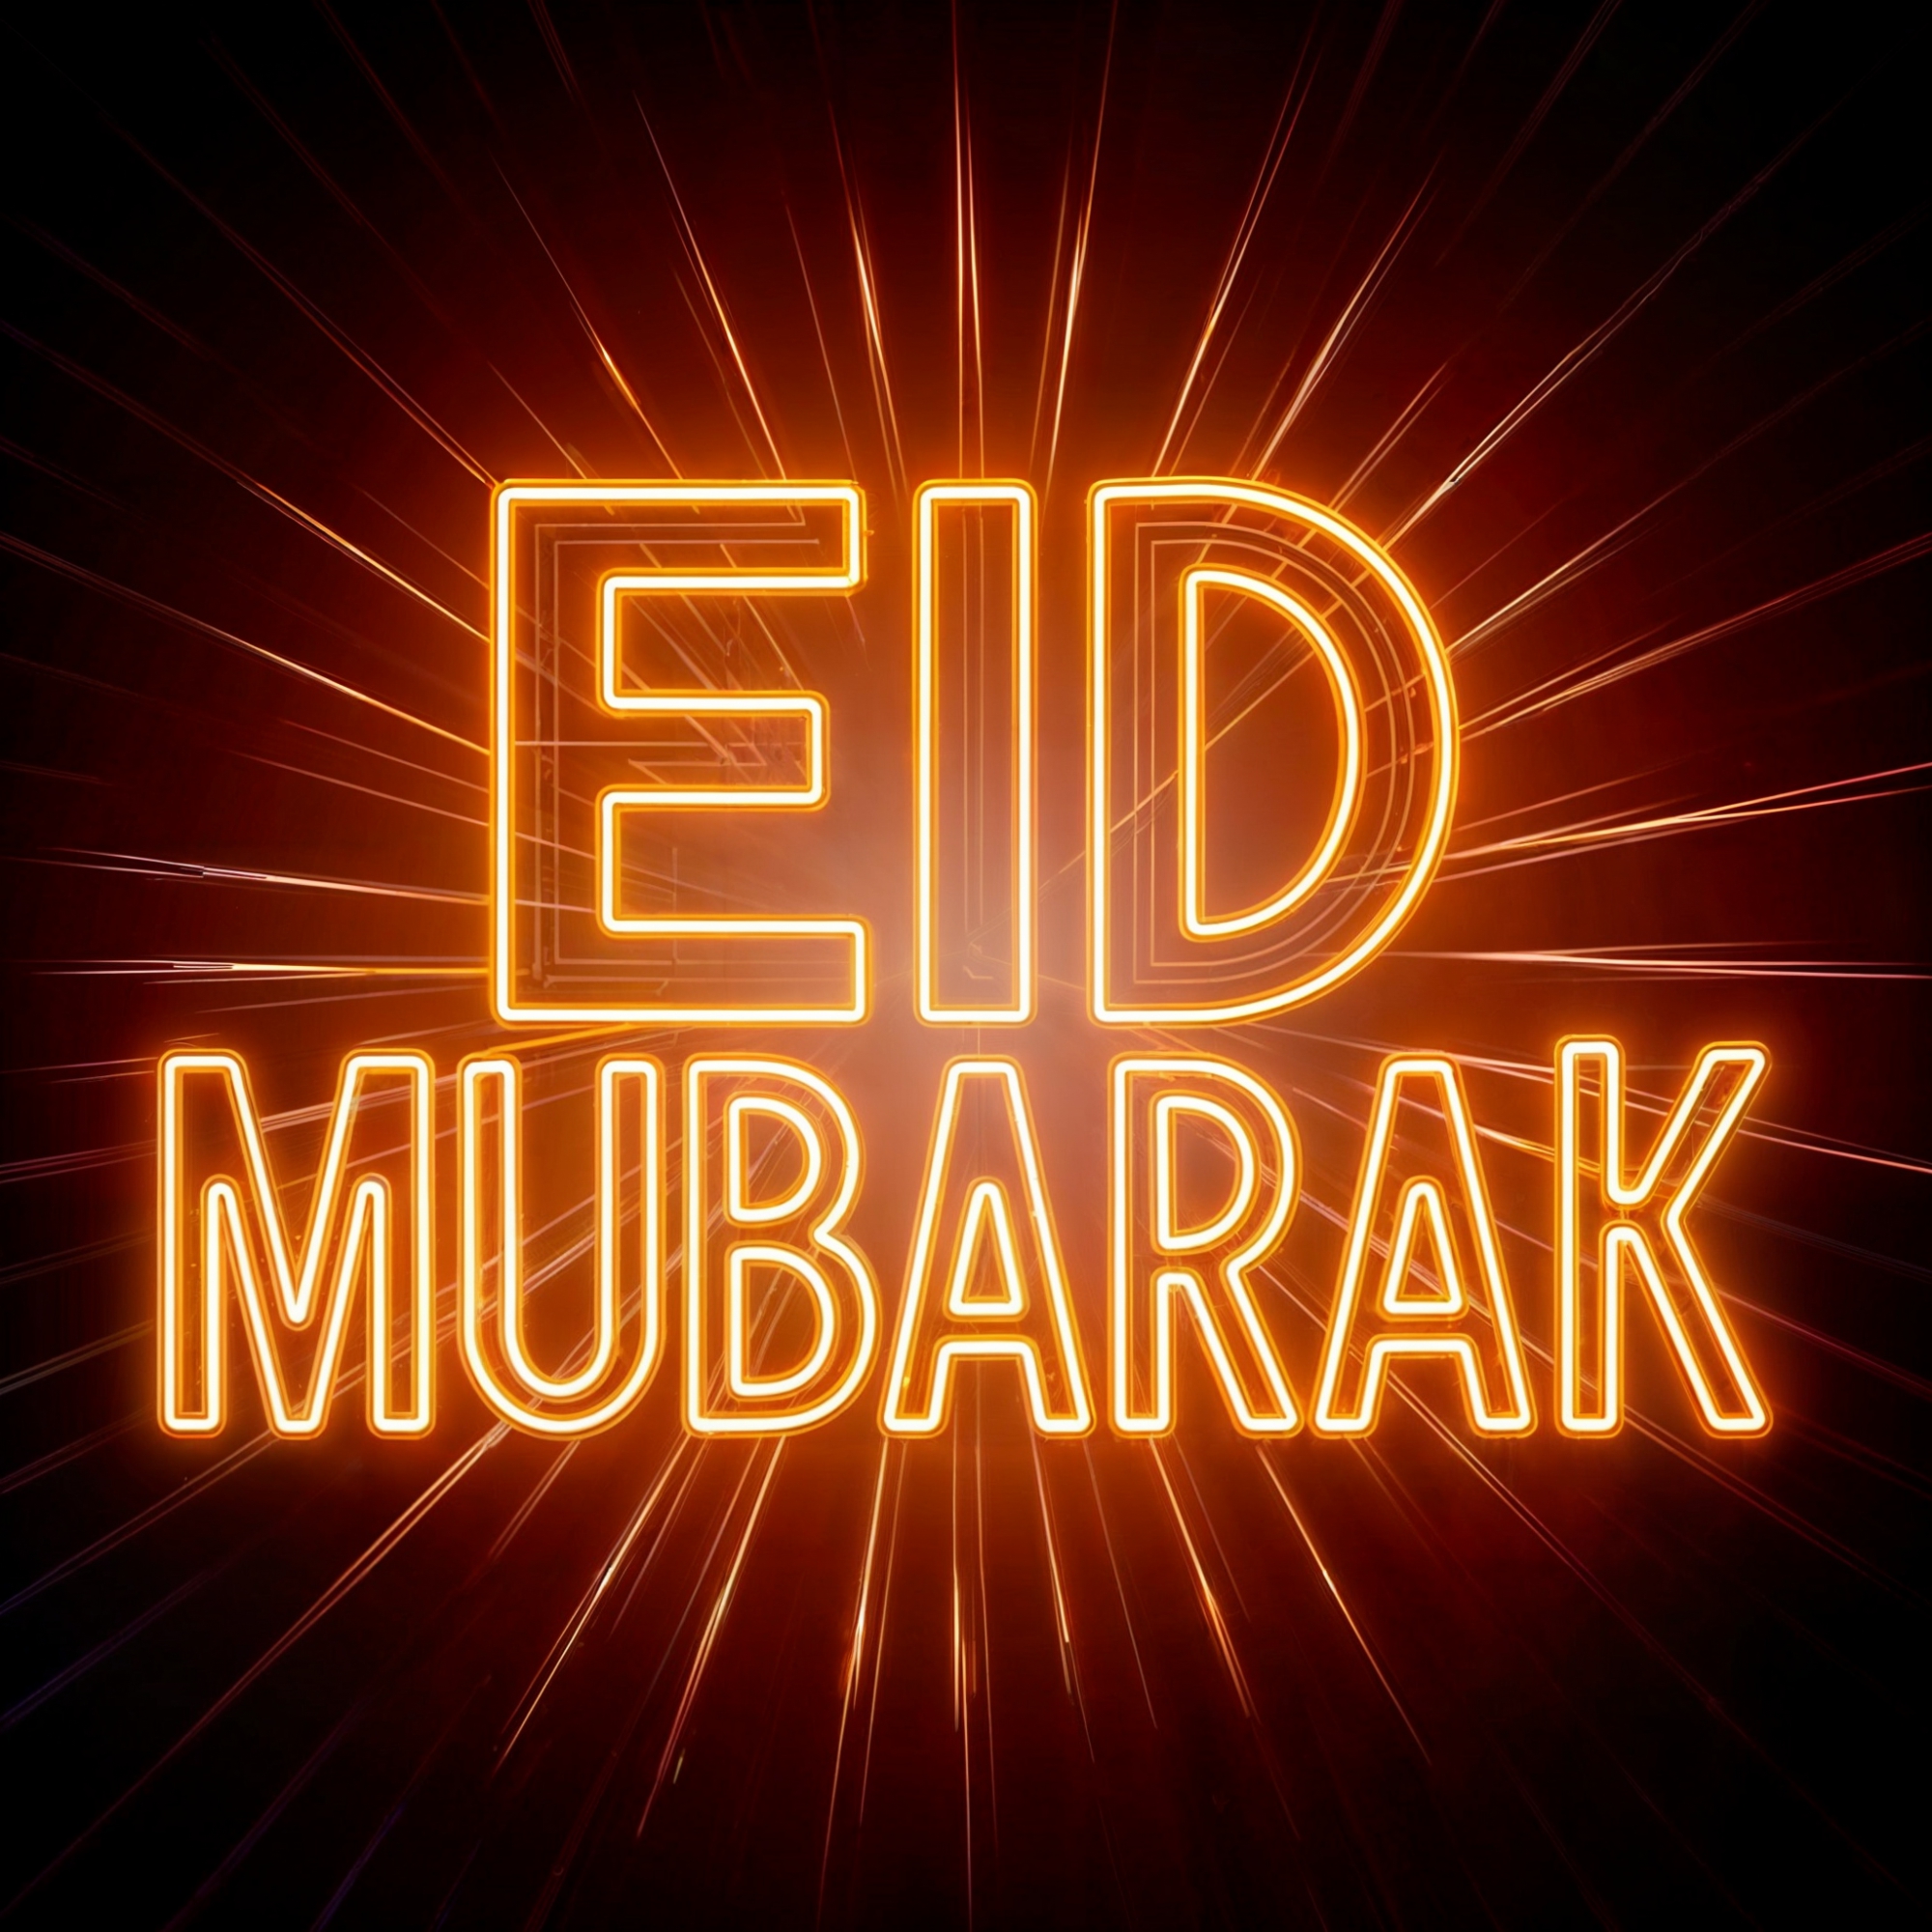 Eid Mubarak text with neon light download for free